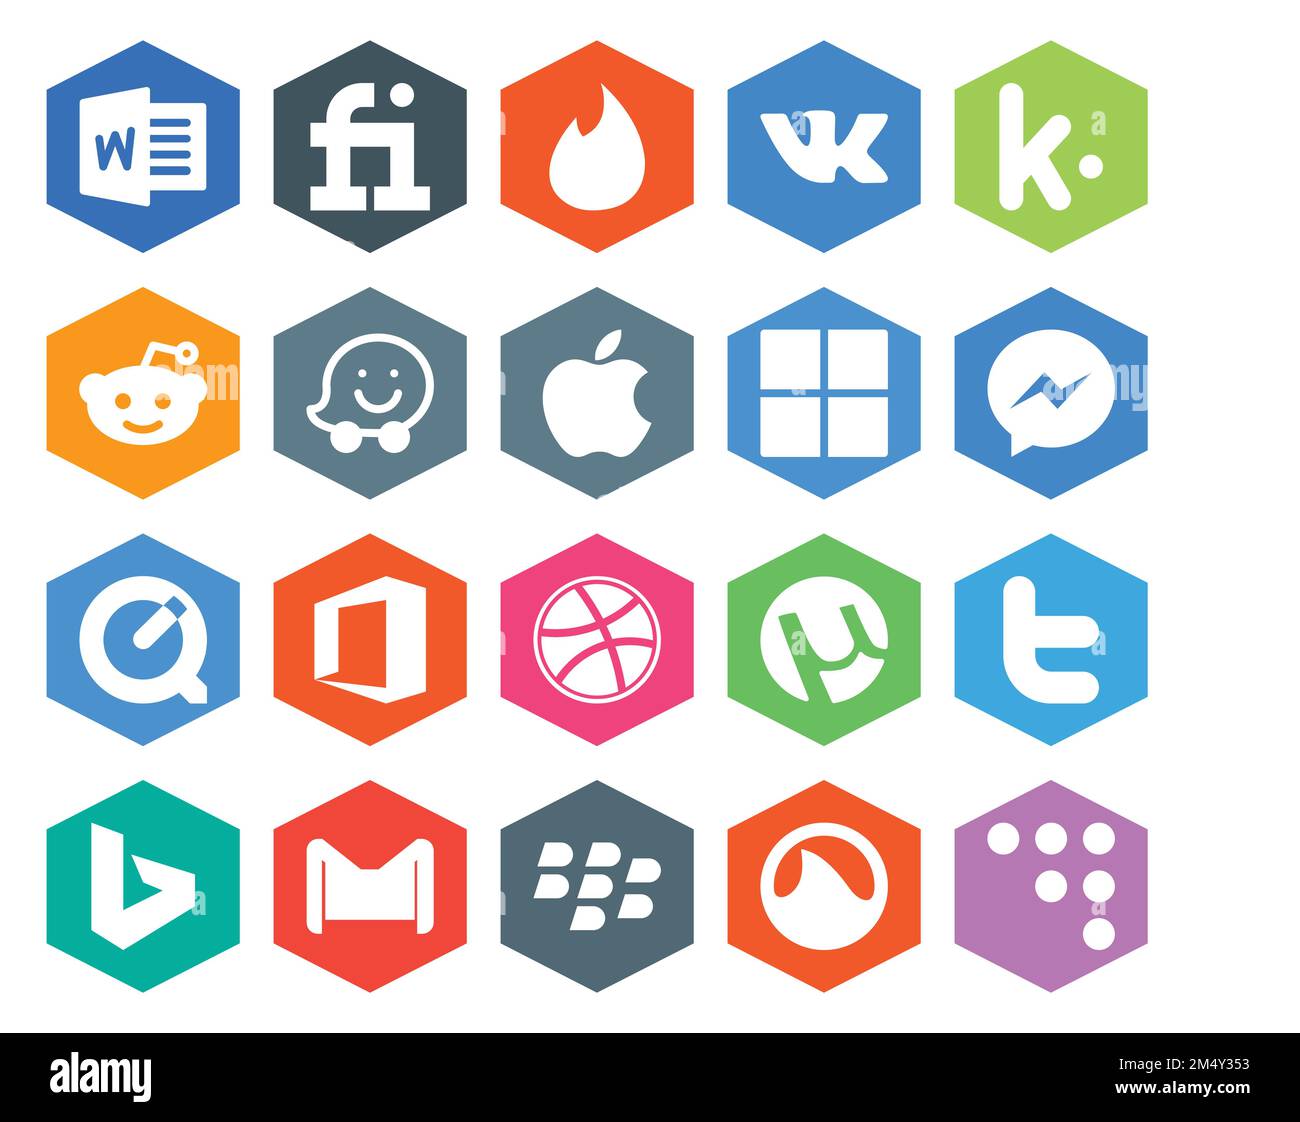 20 Social Media Icon Pack Including gmail. tweet. microsoft. twitter. dribbble Stock Vector